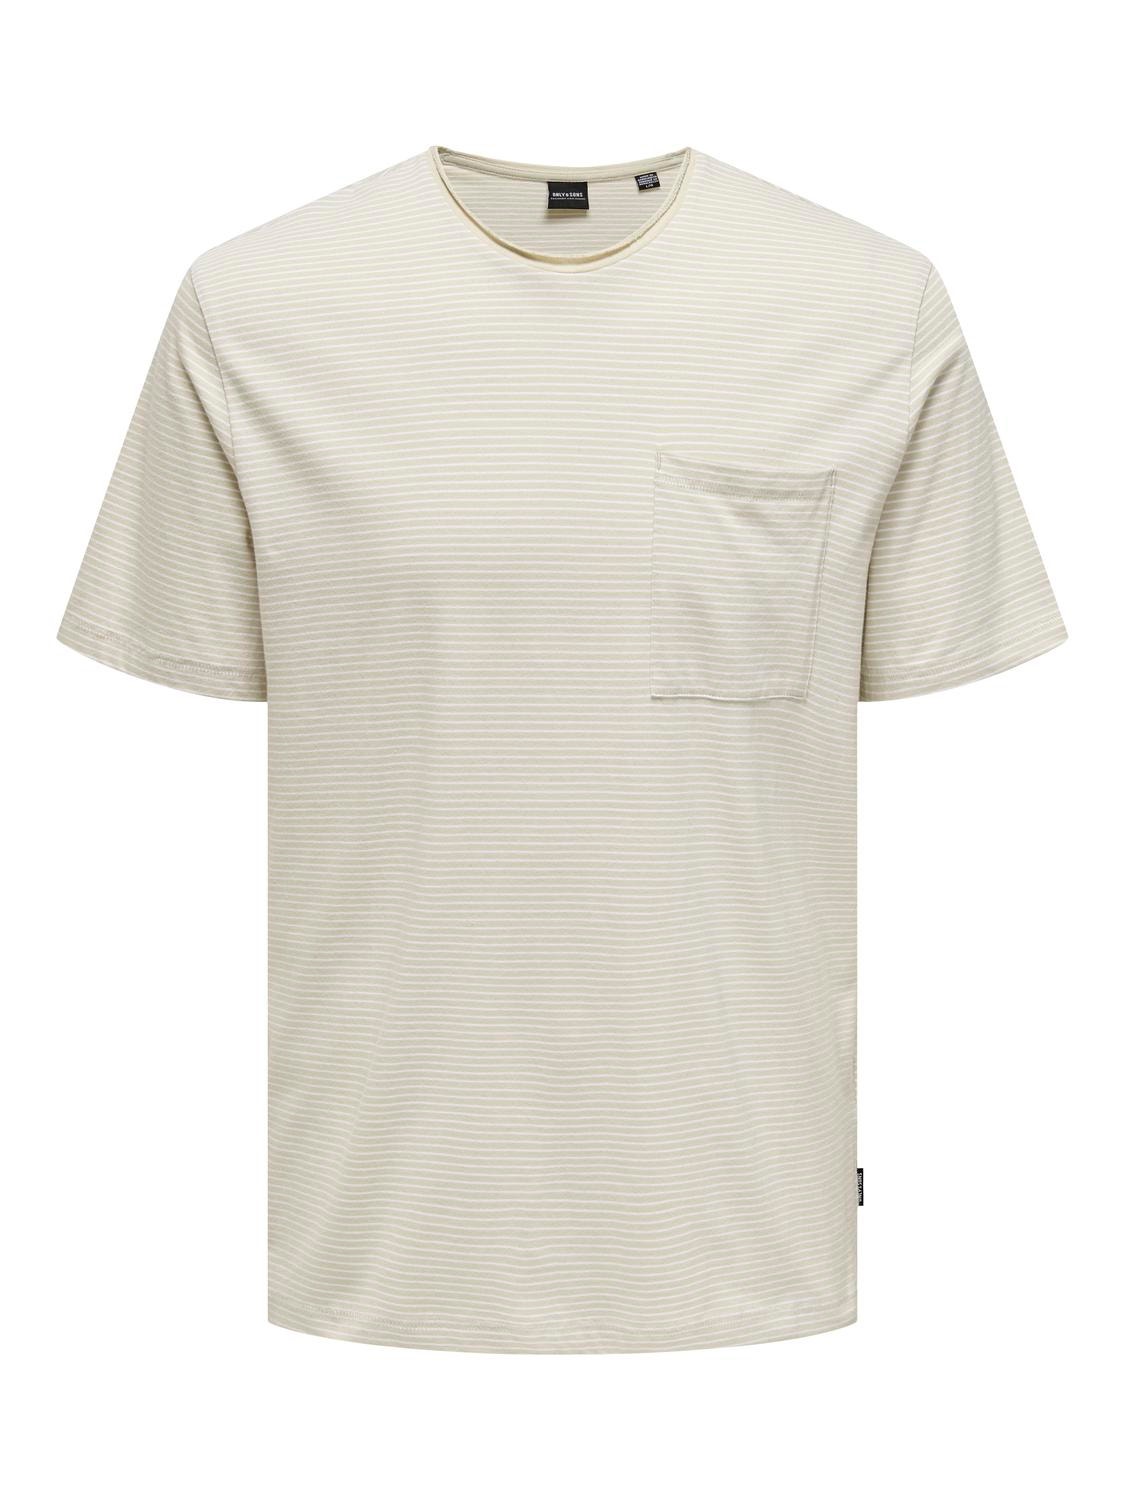 ONLY & SONS Striped o-neck with chest pocket -White - 22025680